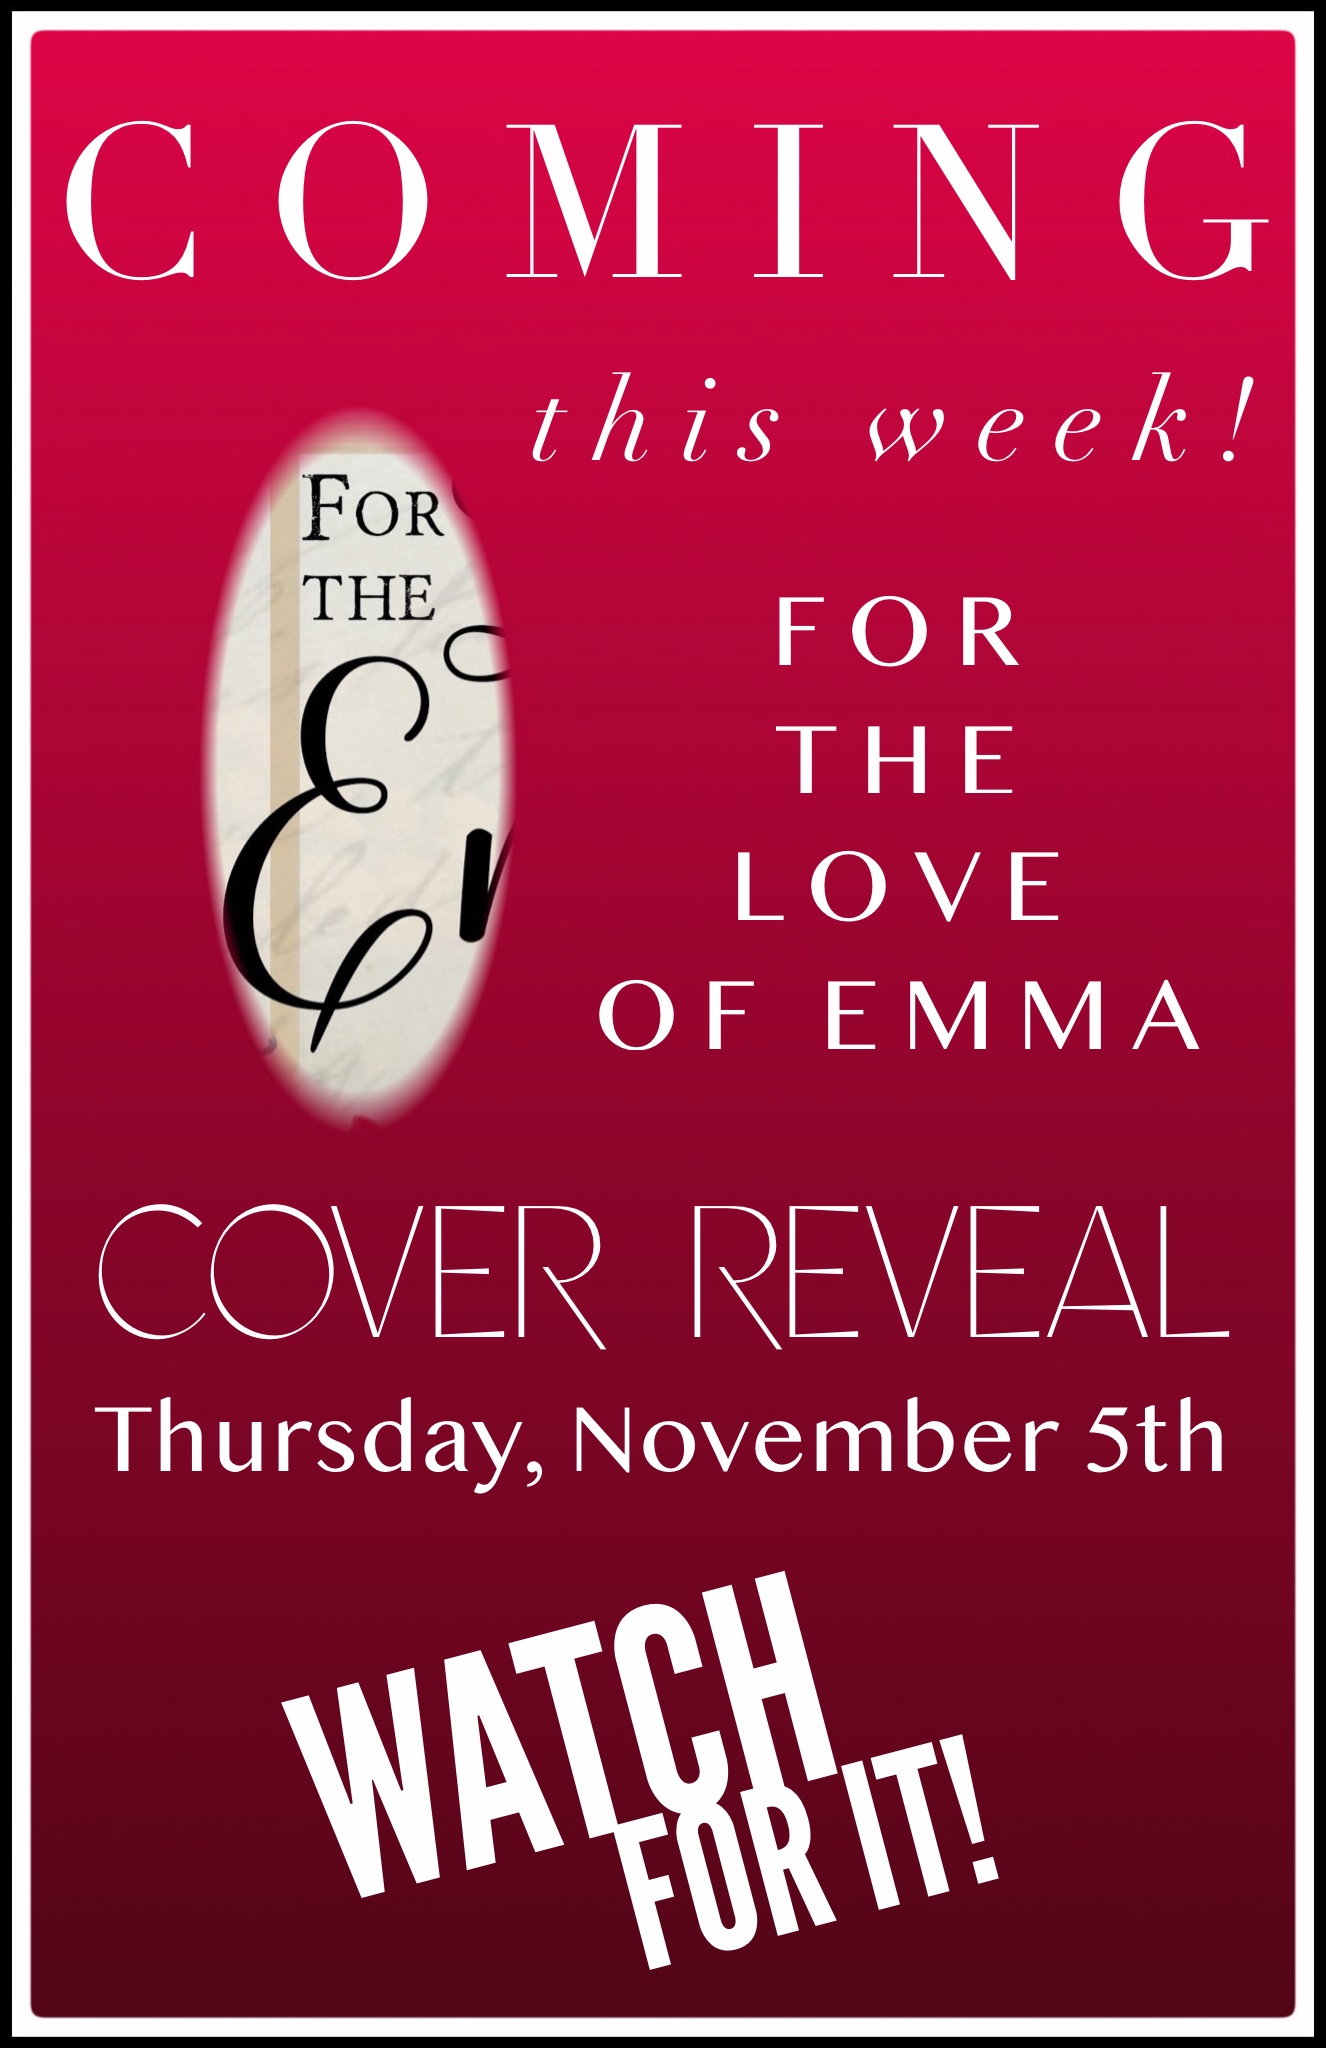 Cover Reveal Announcement